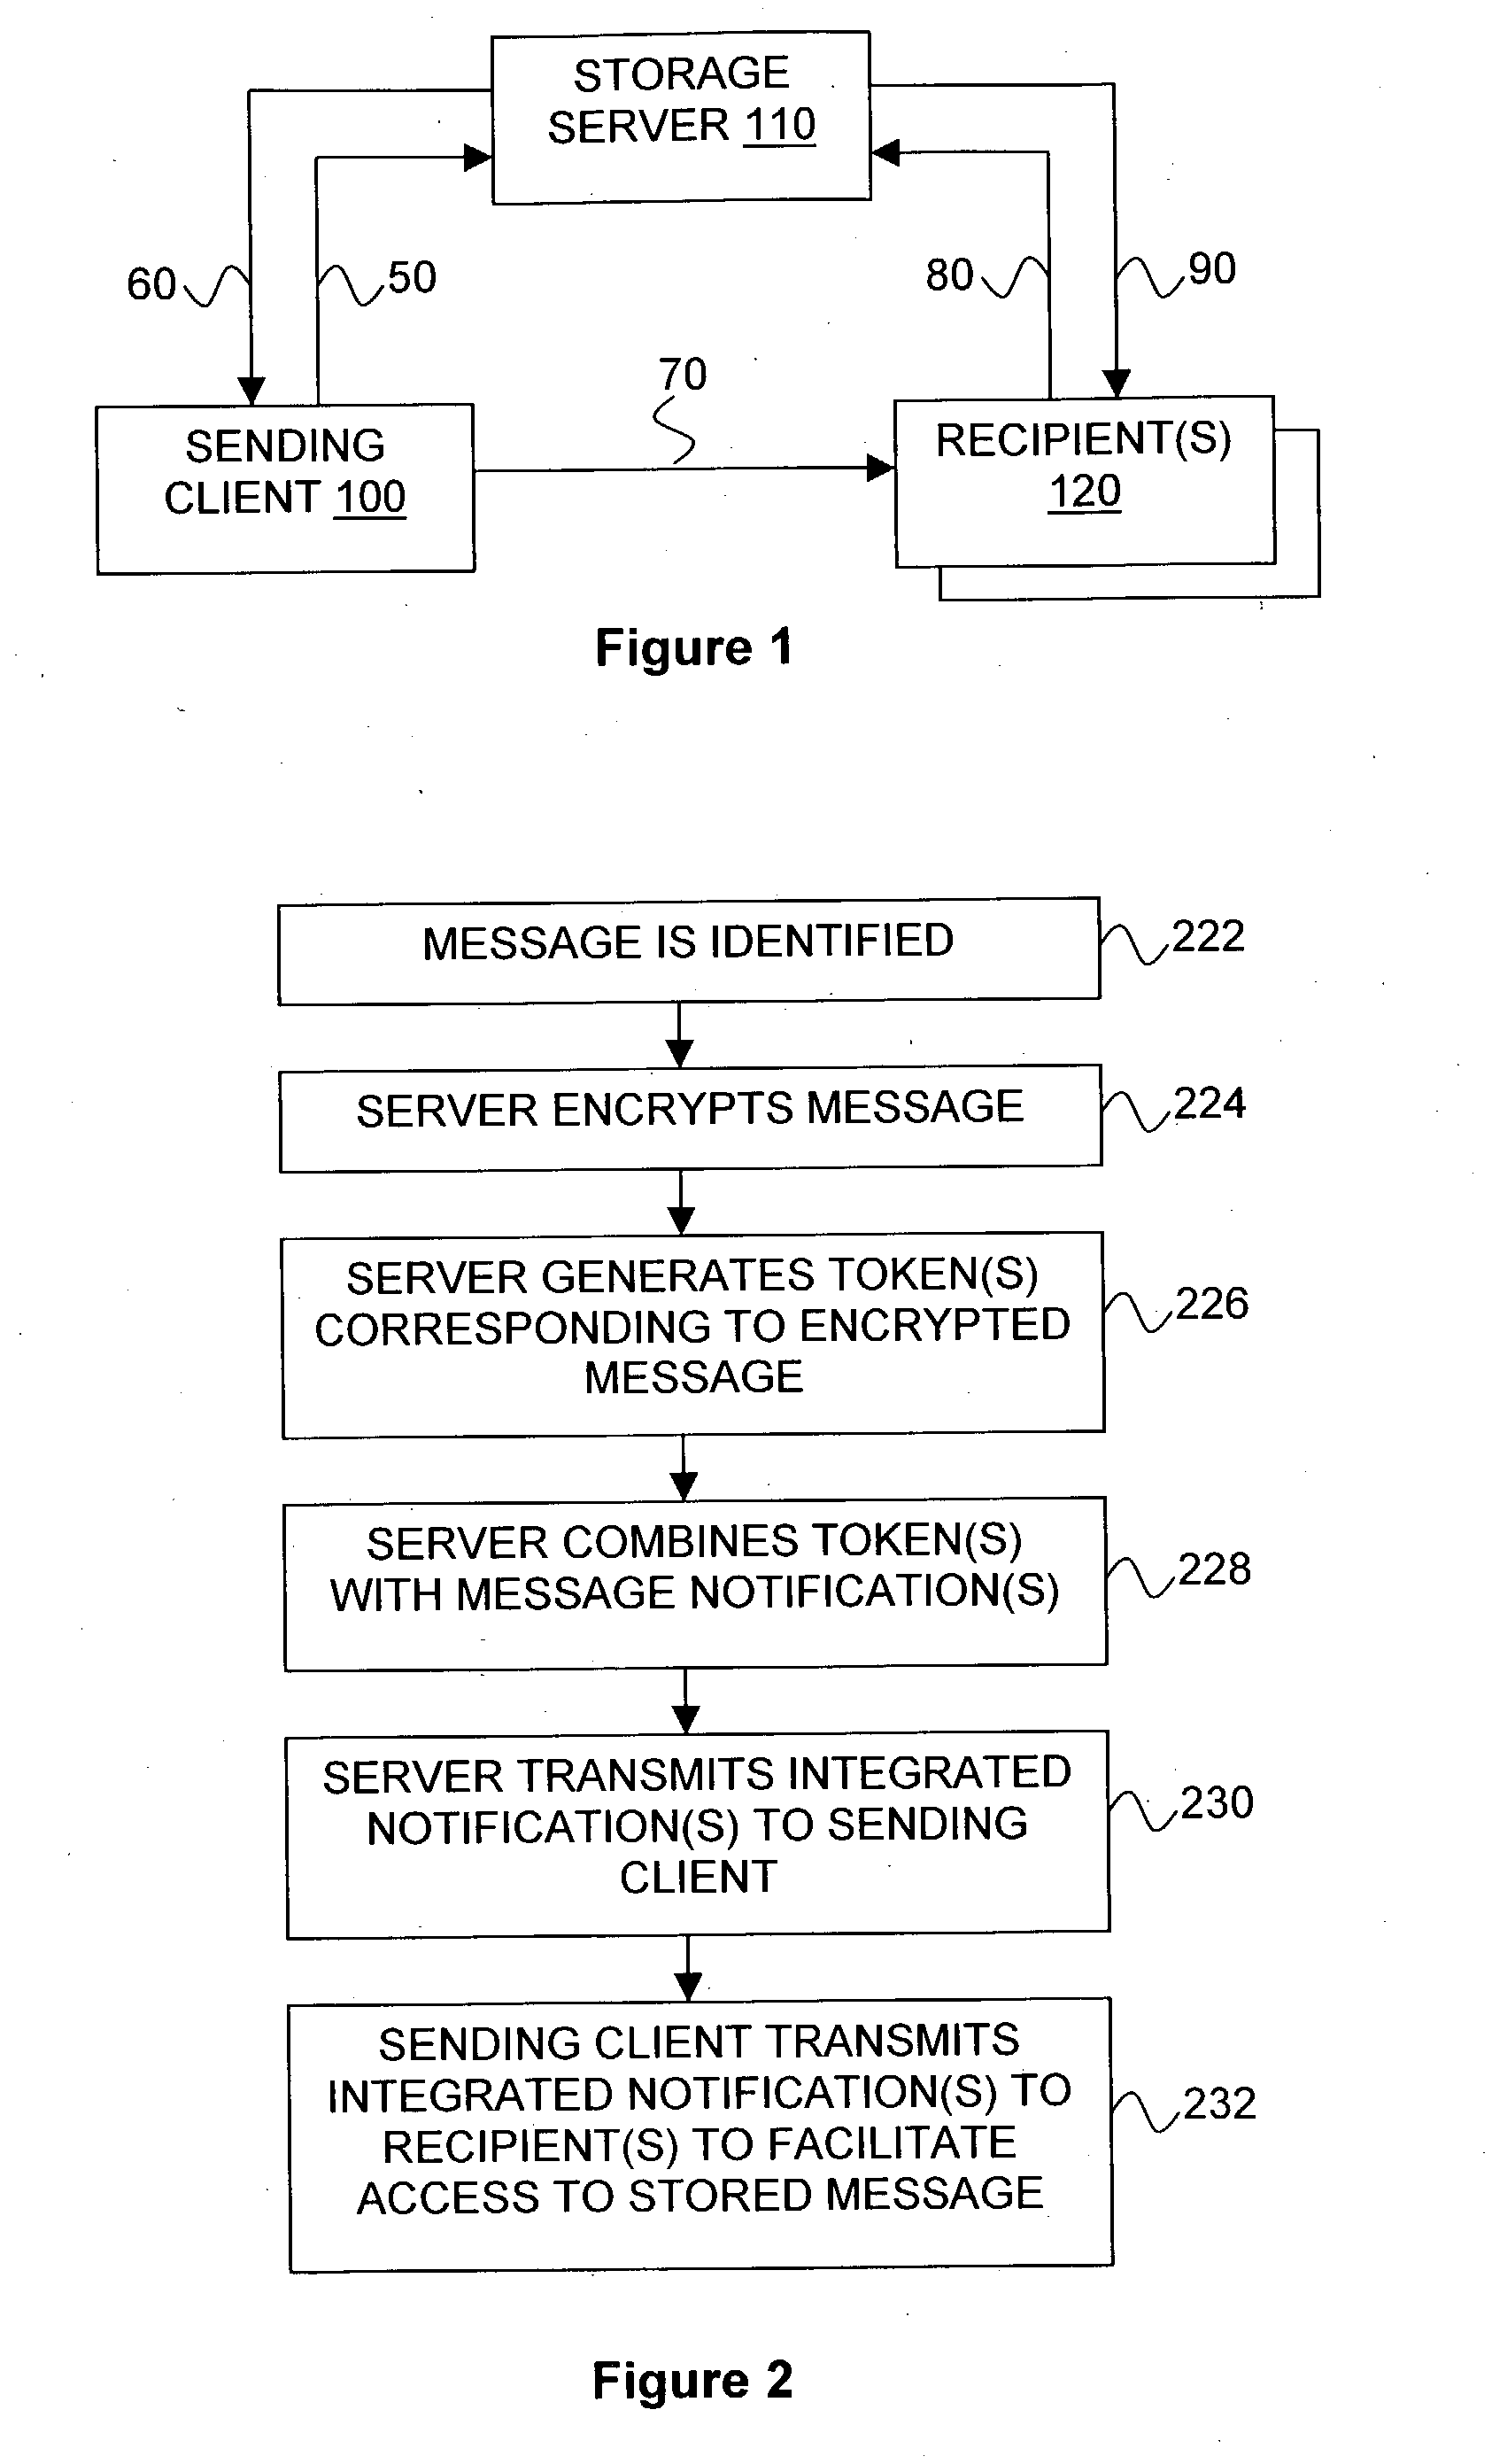 Preemptive and interactive data solicitation for electronic messaging